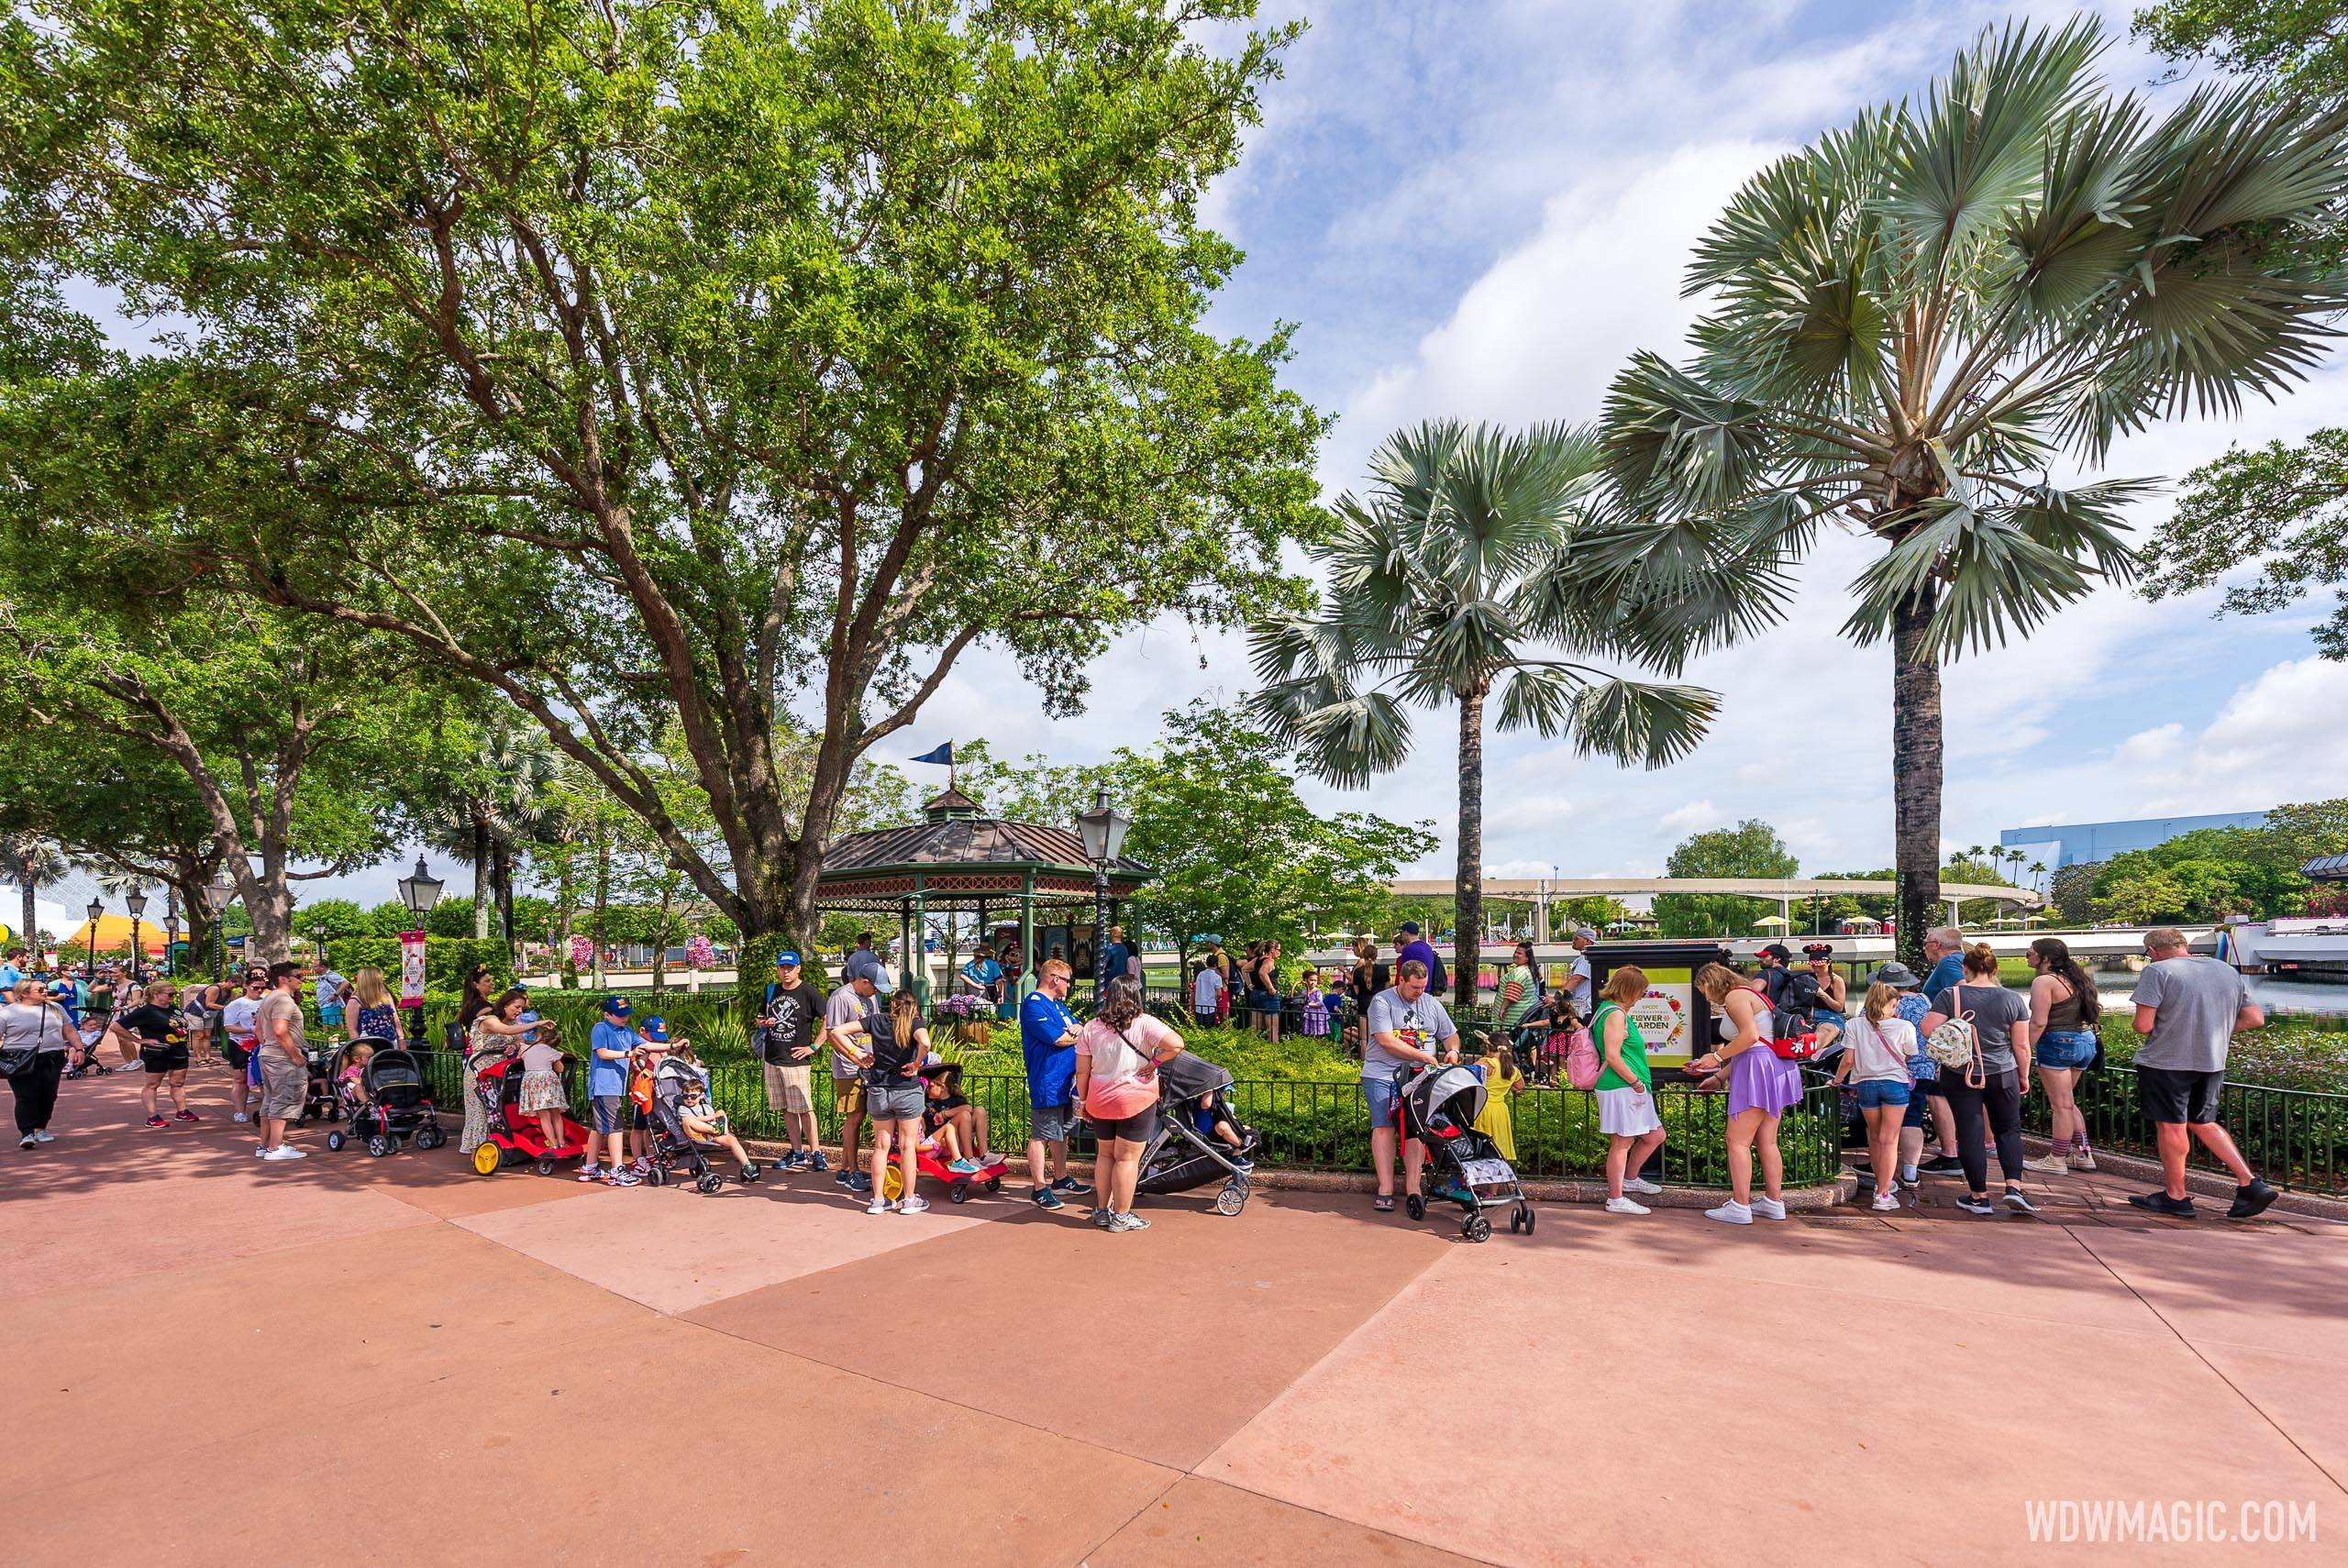 Line for meeting Minnie Mouse